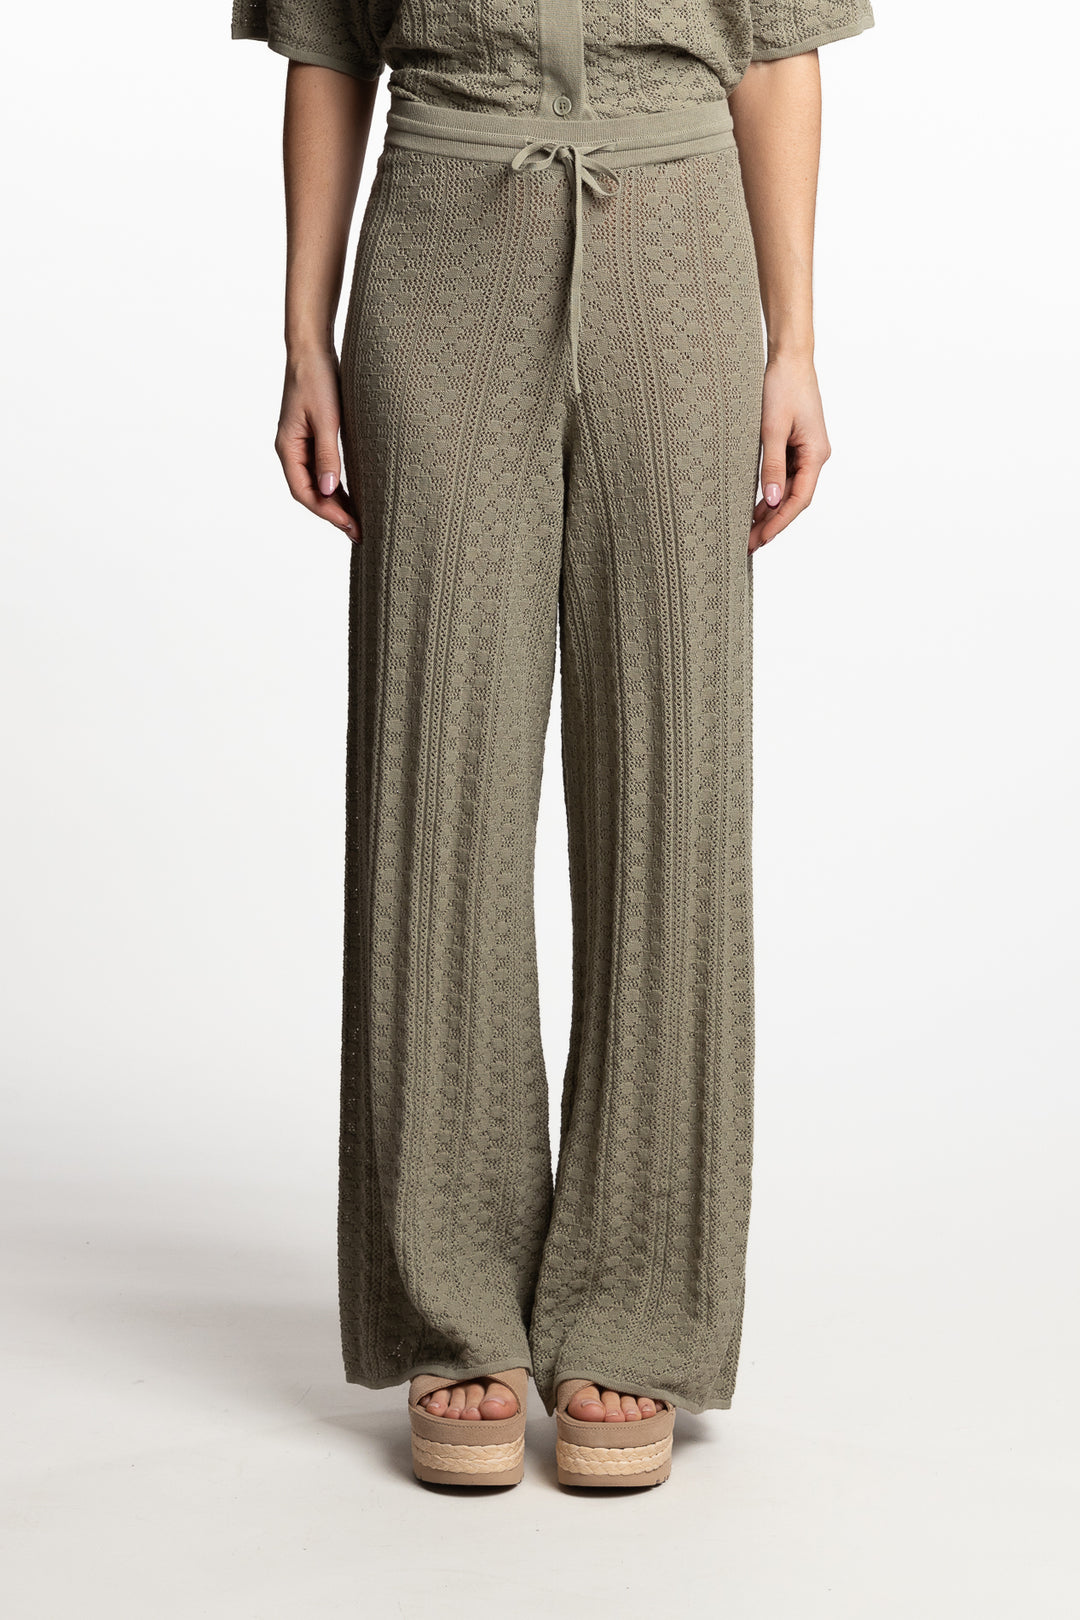 Thiril Crochet Knit Trousers- Teal